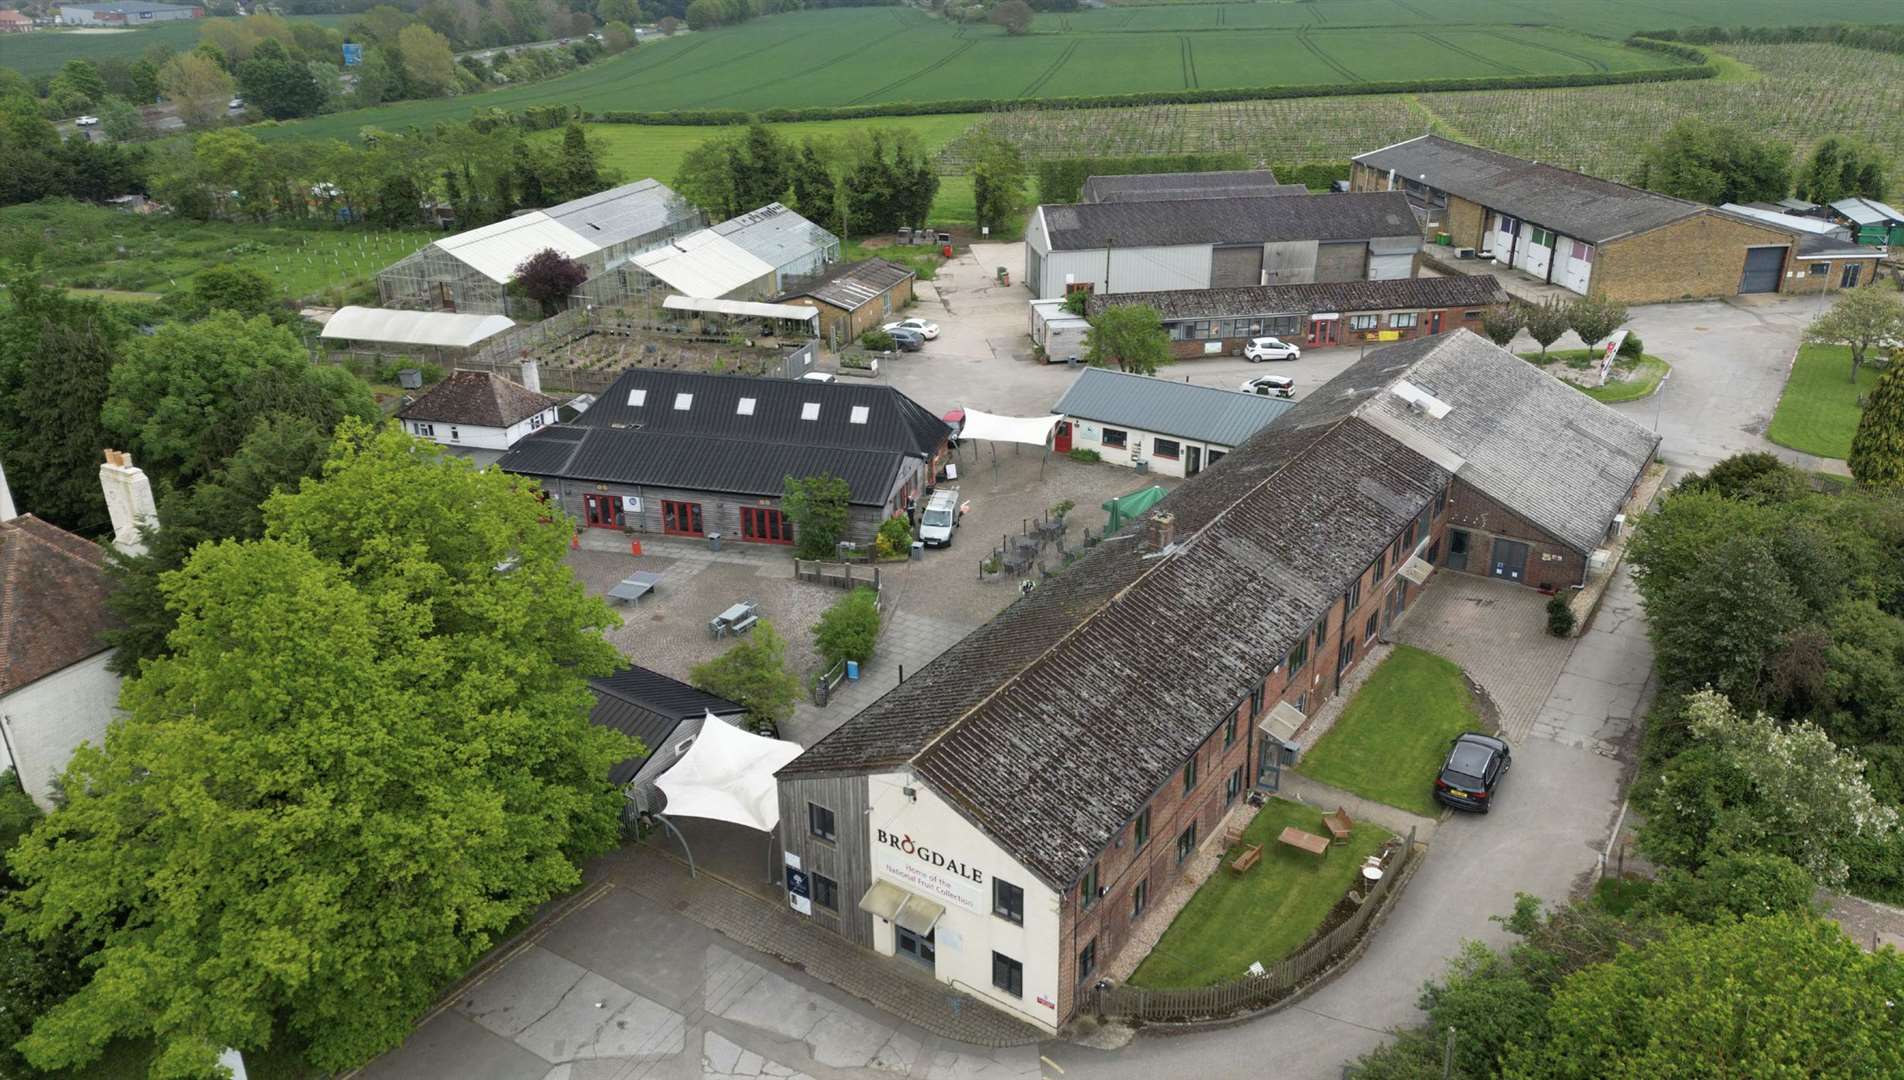 Brogdale Farm has been sold off as part of a multi-million pound deal. Picture: George Webb Finn